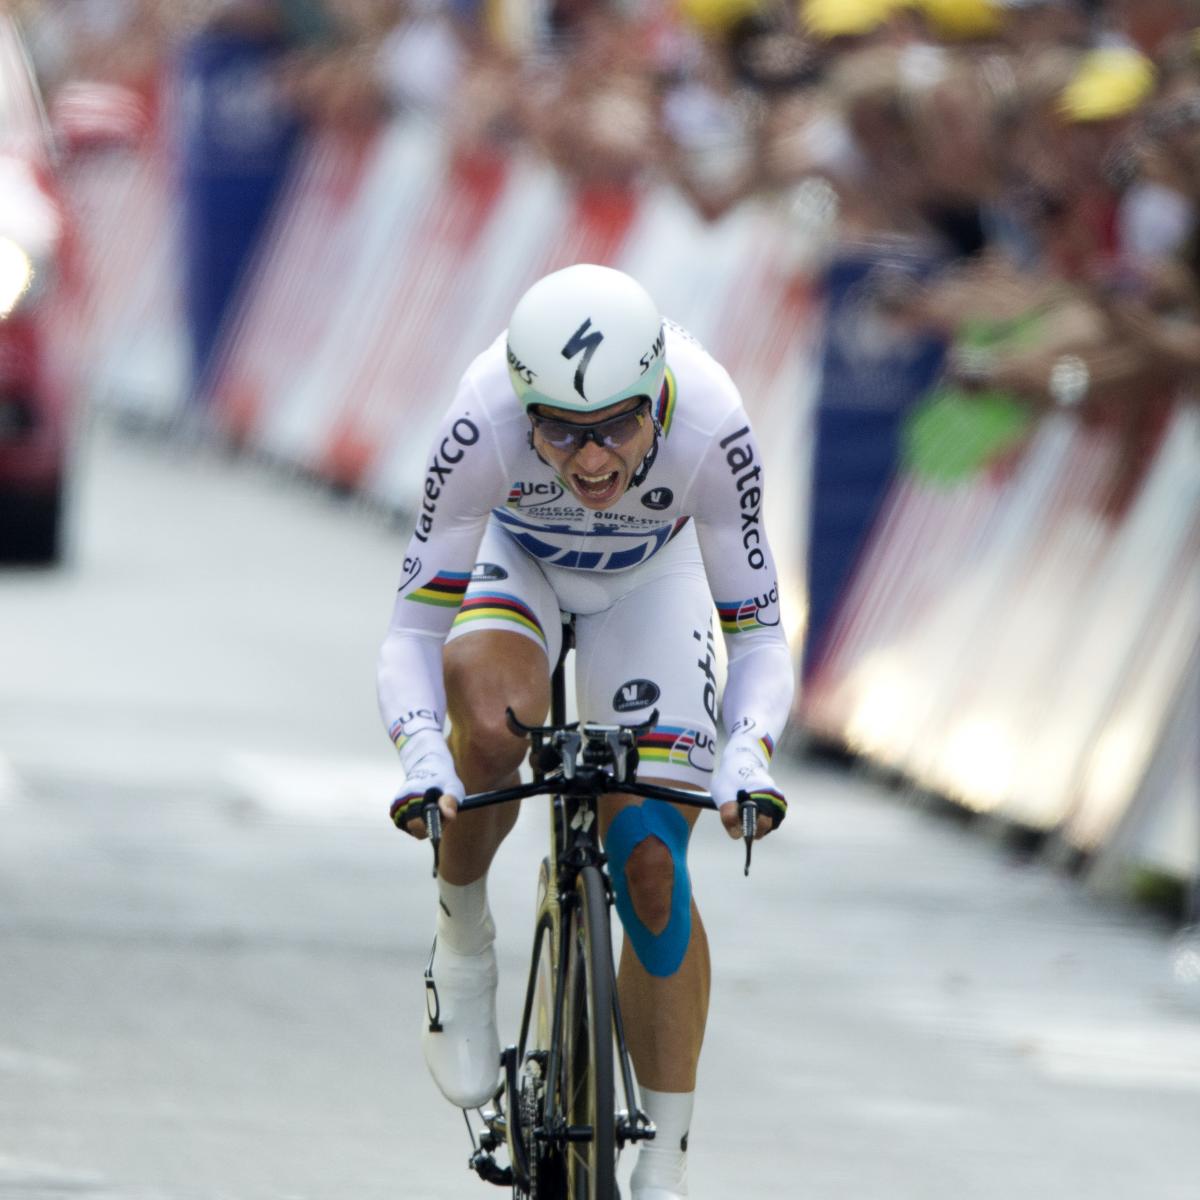 Tour de France 2014: Stage 20 Winner, Results and Updated Leaderboard